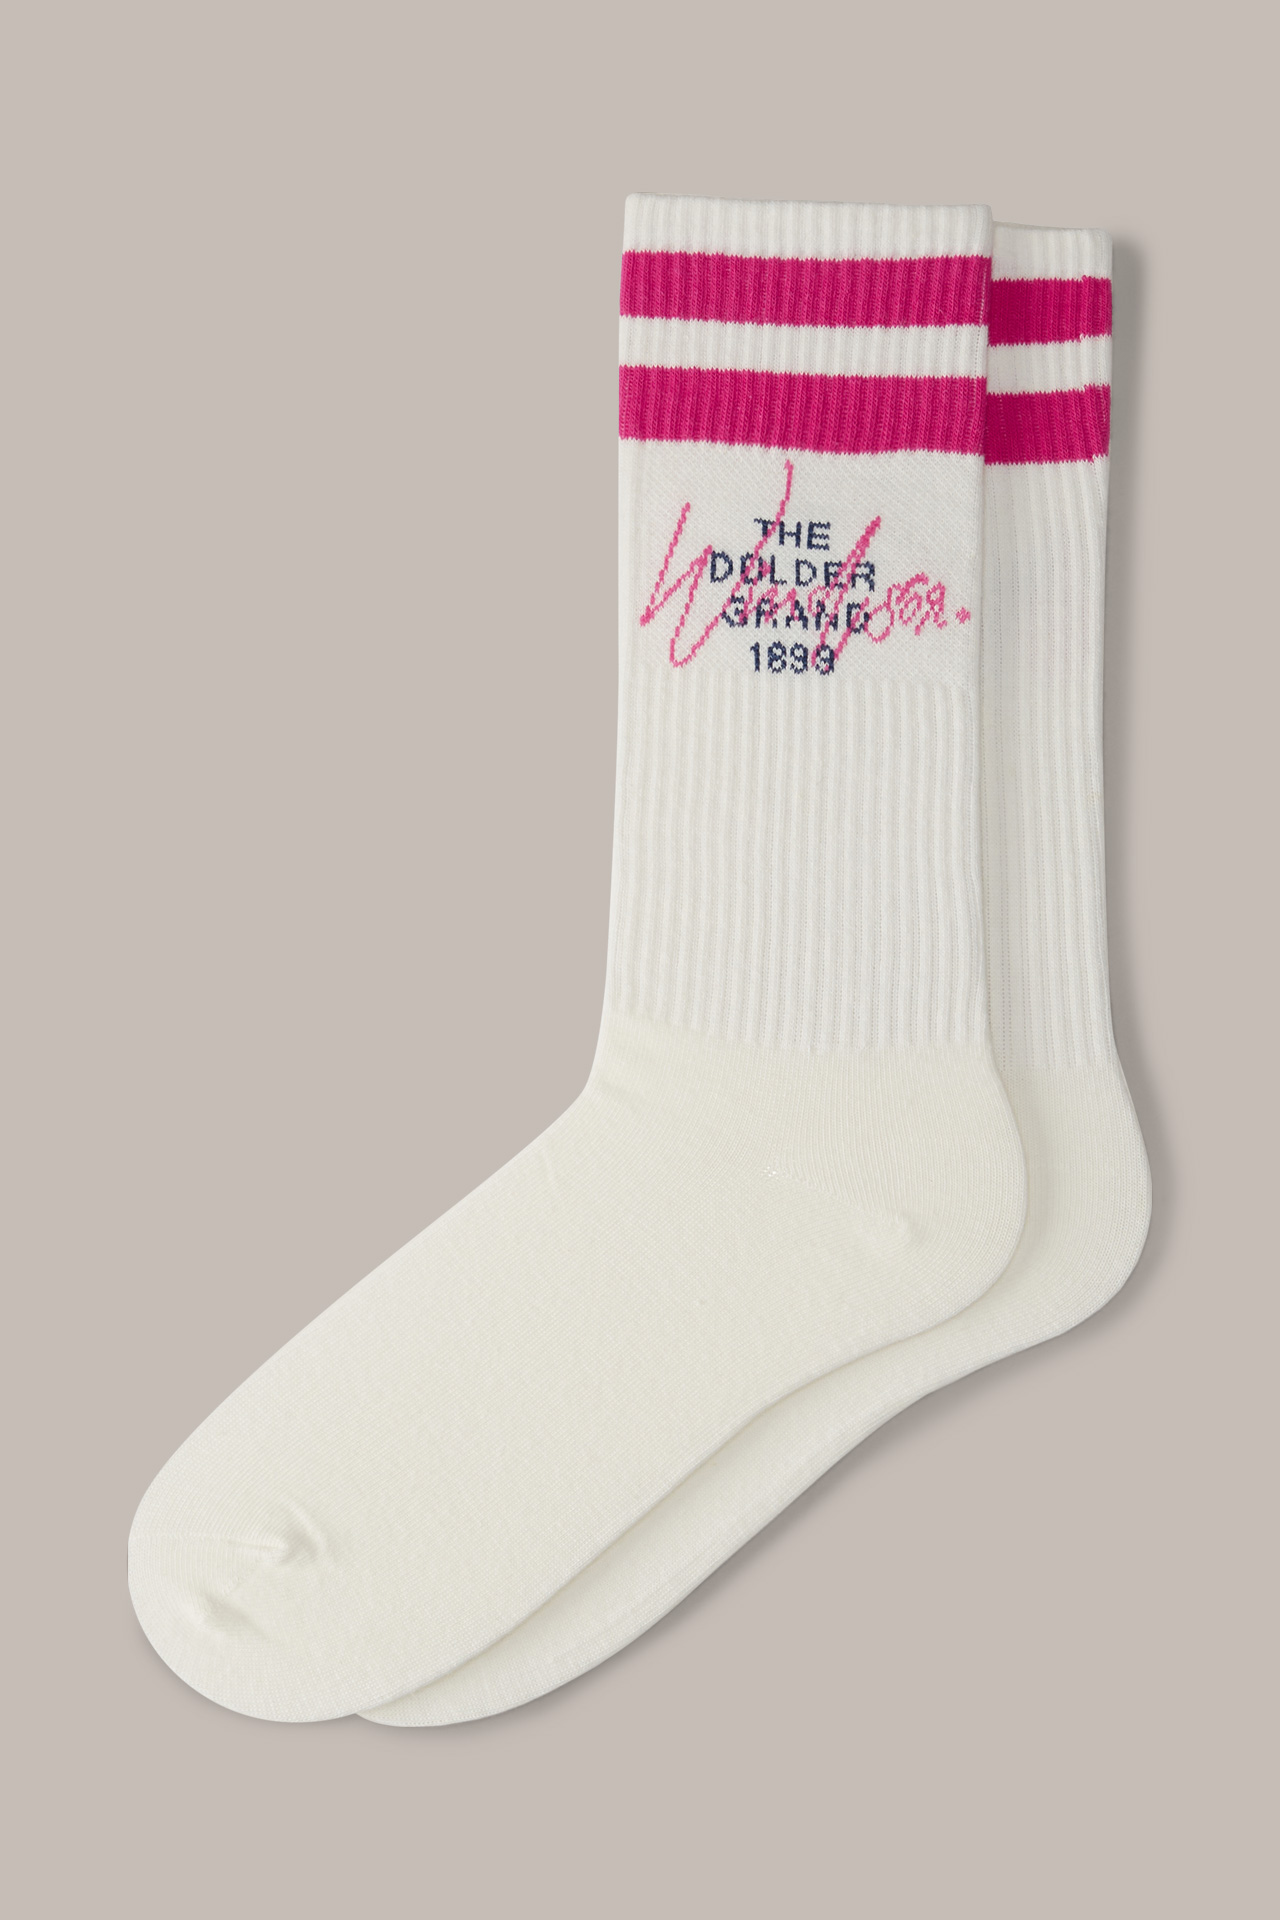 Socks in white and pink